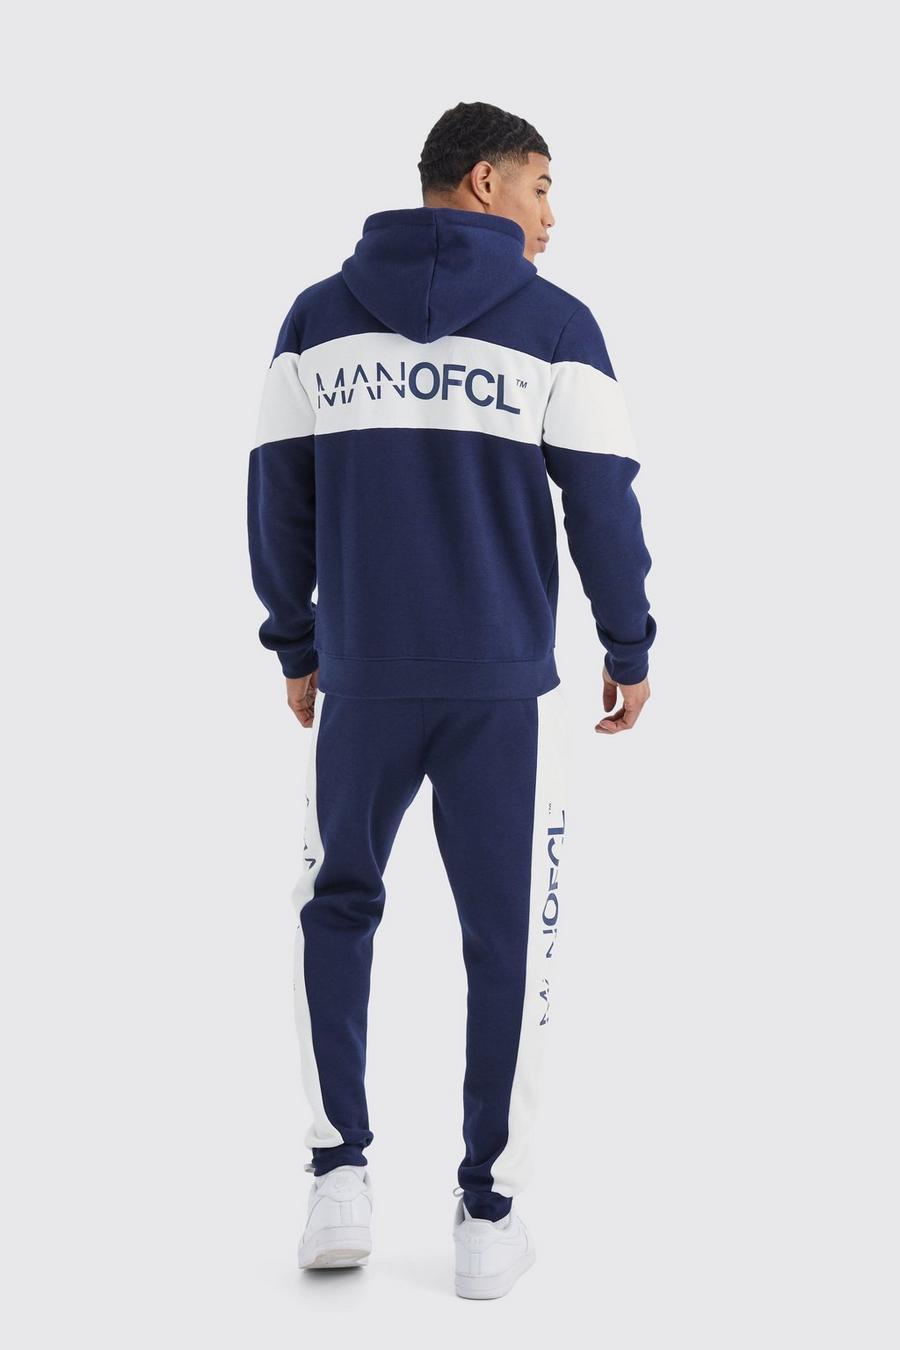 Navy Man Ofcl Slim Colour Block Hooded Tracksuit